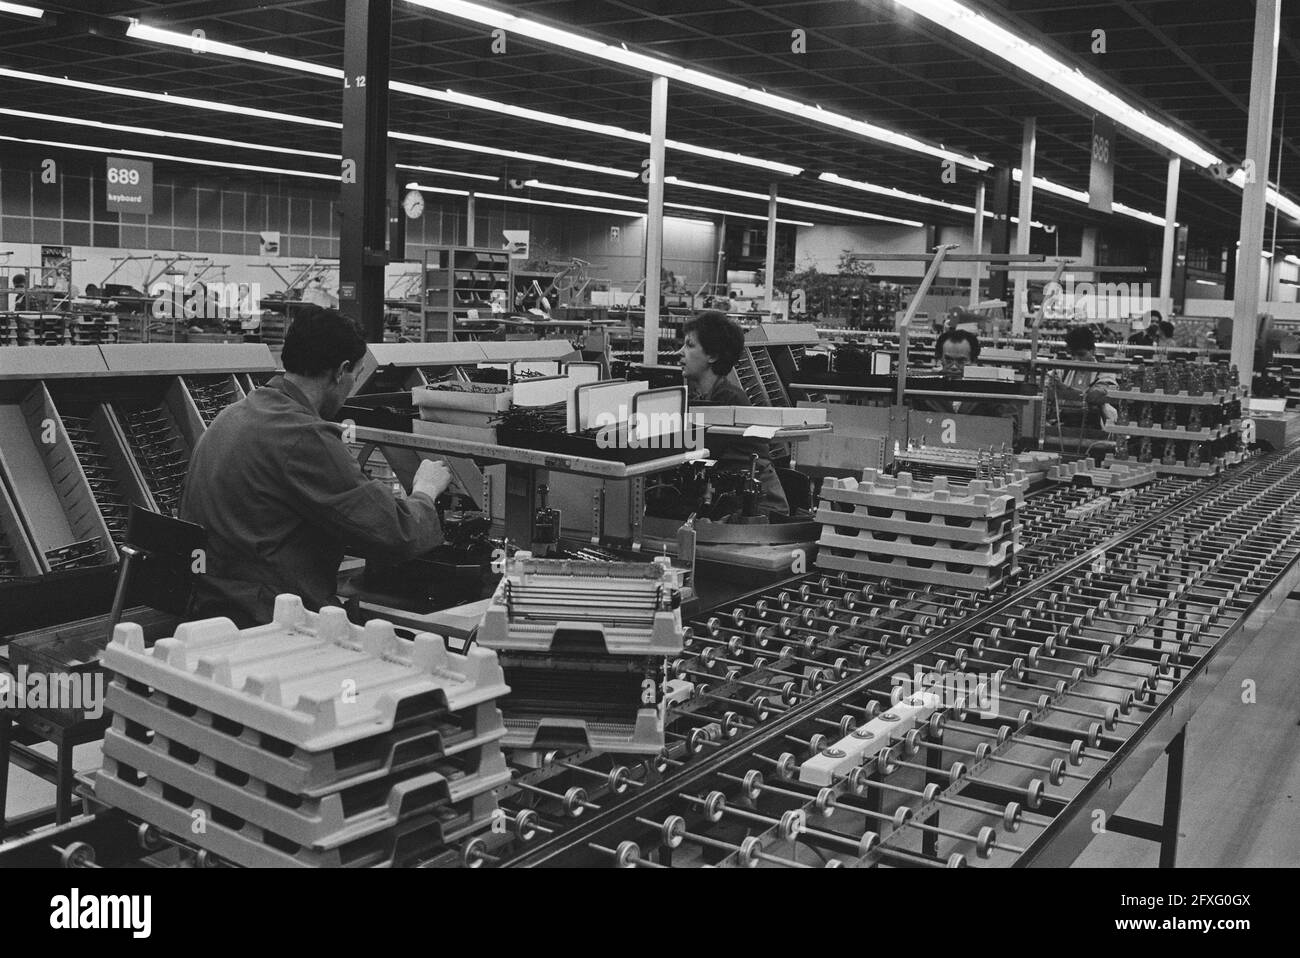 van-aardenne-ez-visits-ibm-factory-on-occasion-of-production-of-25-millionth-ball-head-typewriter-and-for-electronic-peripheral-equipment-to-be-put-into-use-january-17-1984-factories-the-netherlands-20th-century-press-agency-photo-news-to-remember-documentary-historic-photography-1945-1990-visual-stories-human-history-of-the-twentieth-century-capturing-moments-in-time-2FXG0GX.jpg